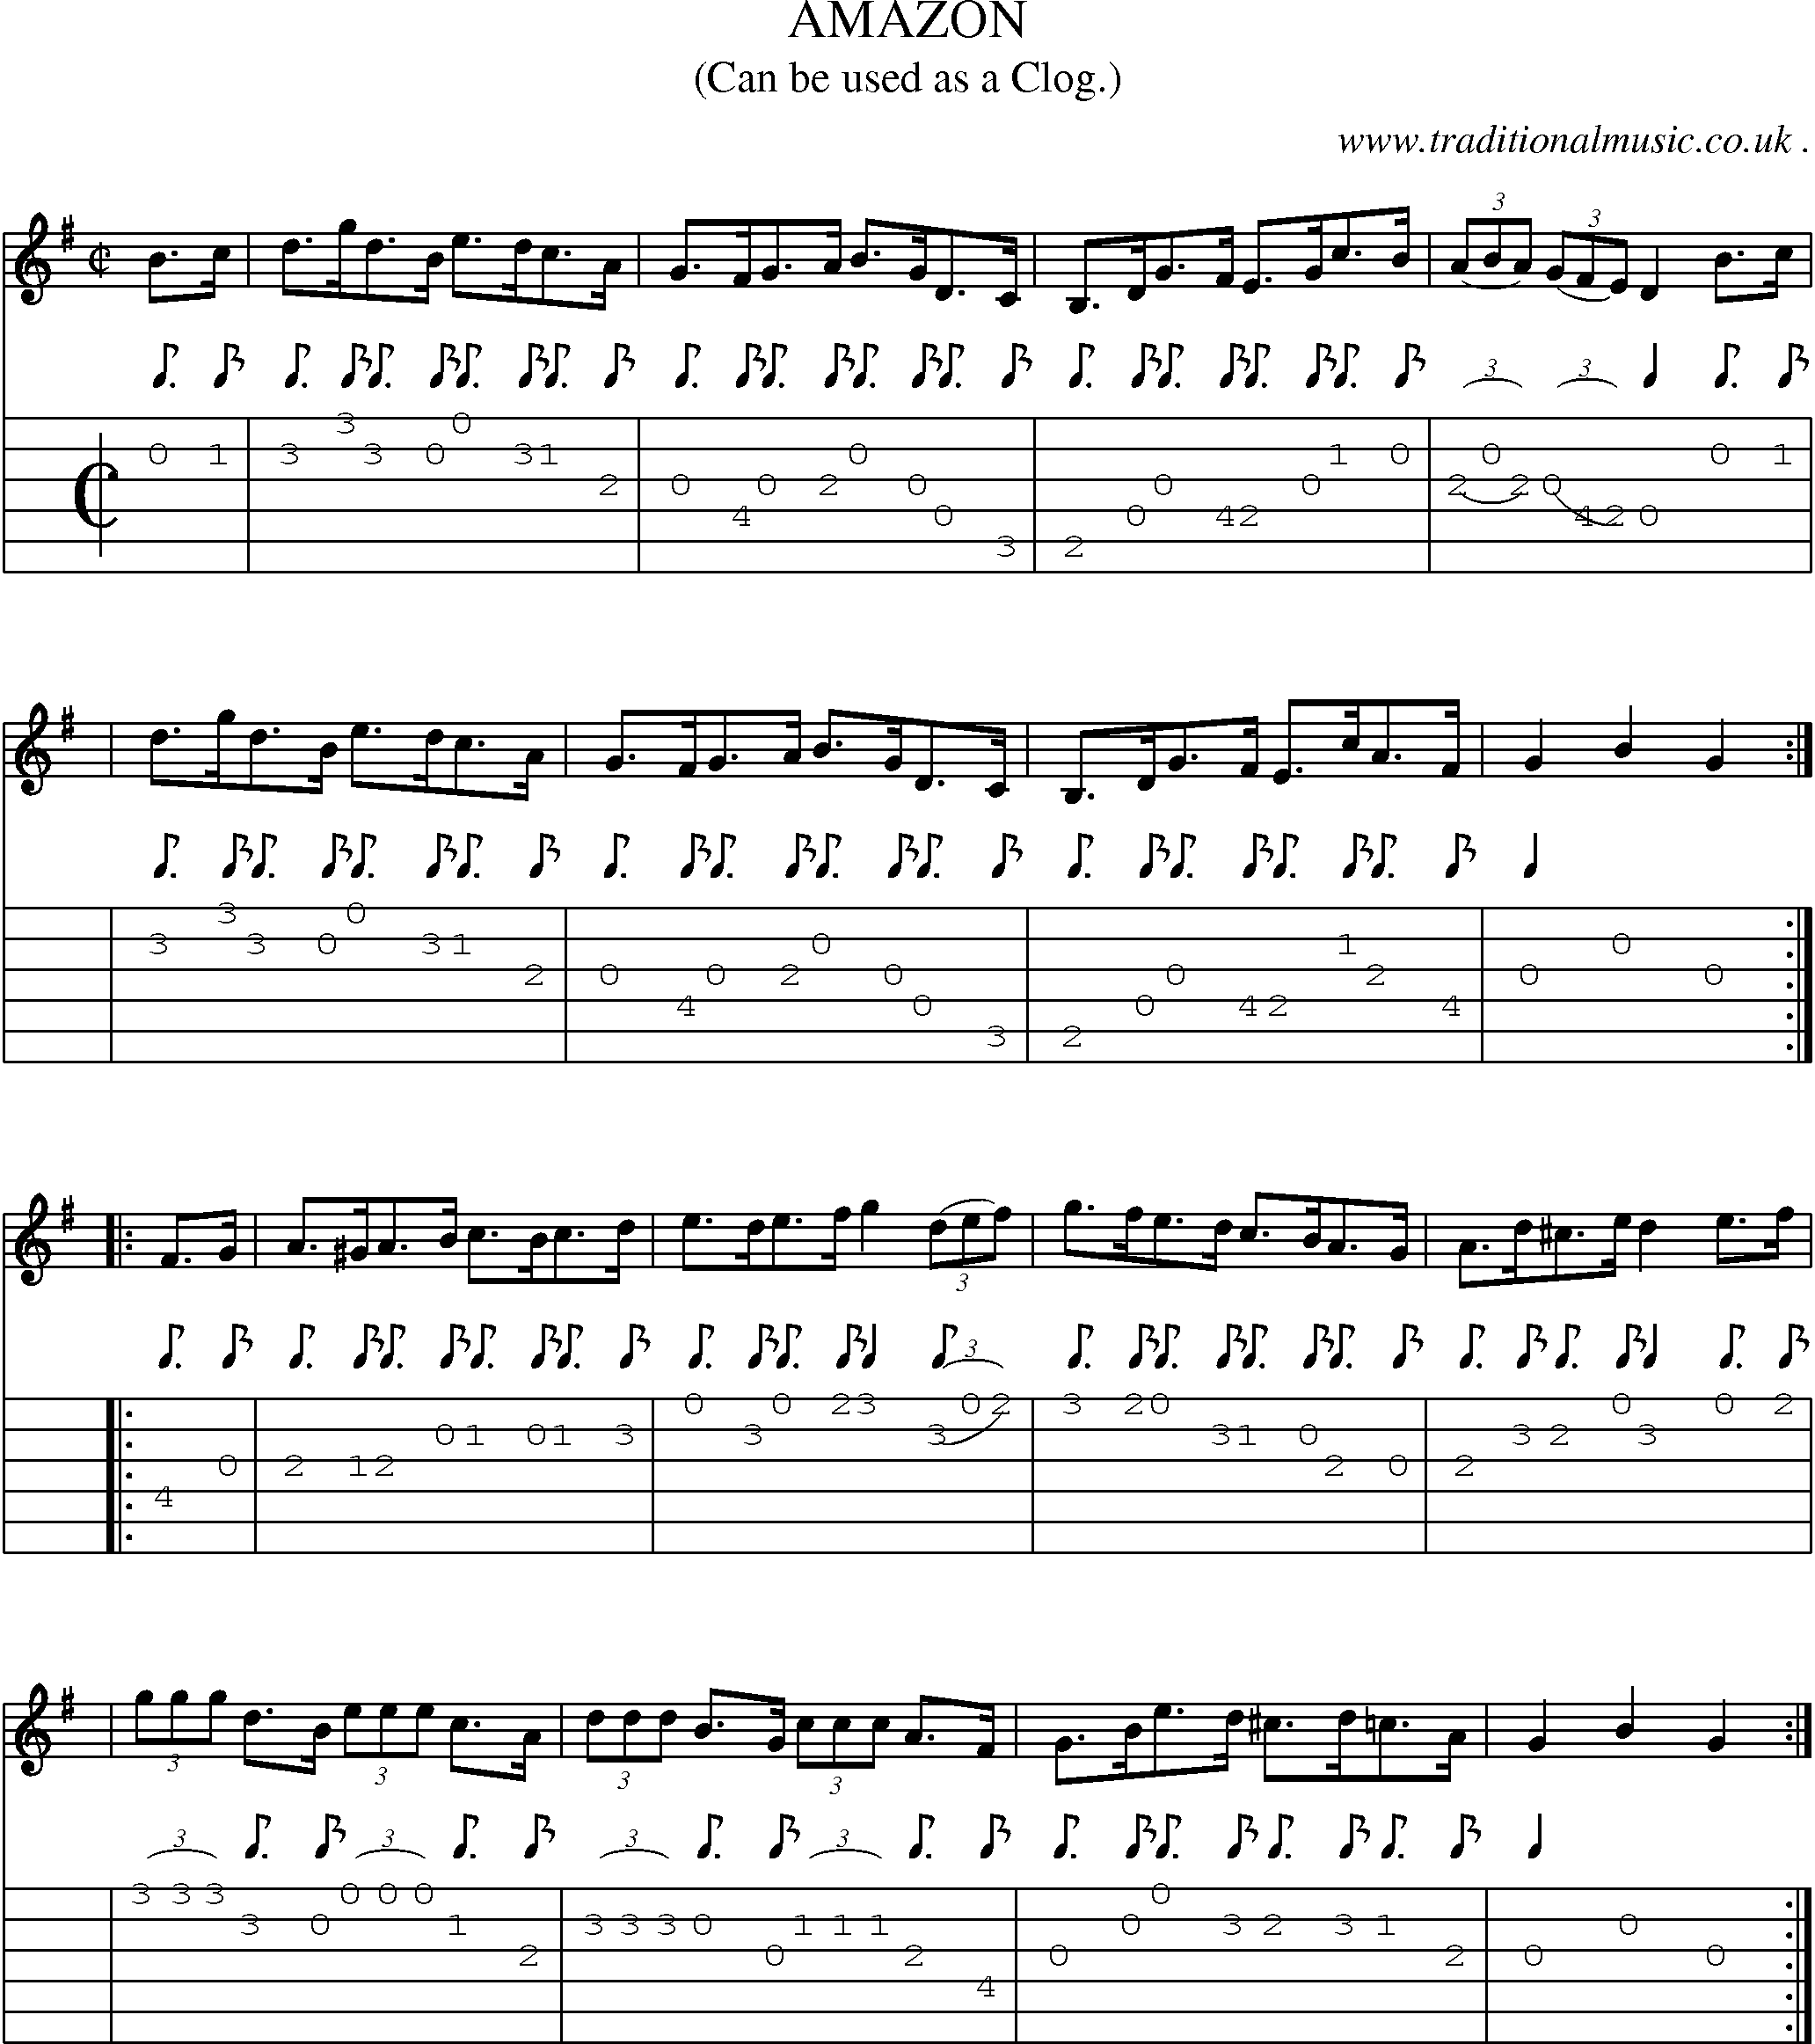 Sheet-Music and Guitar Tabs for Amazon